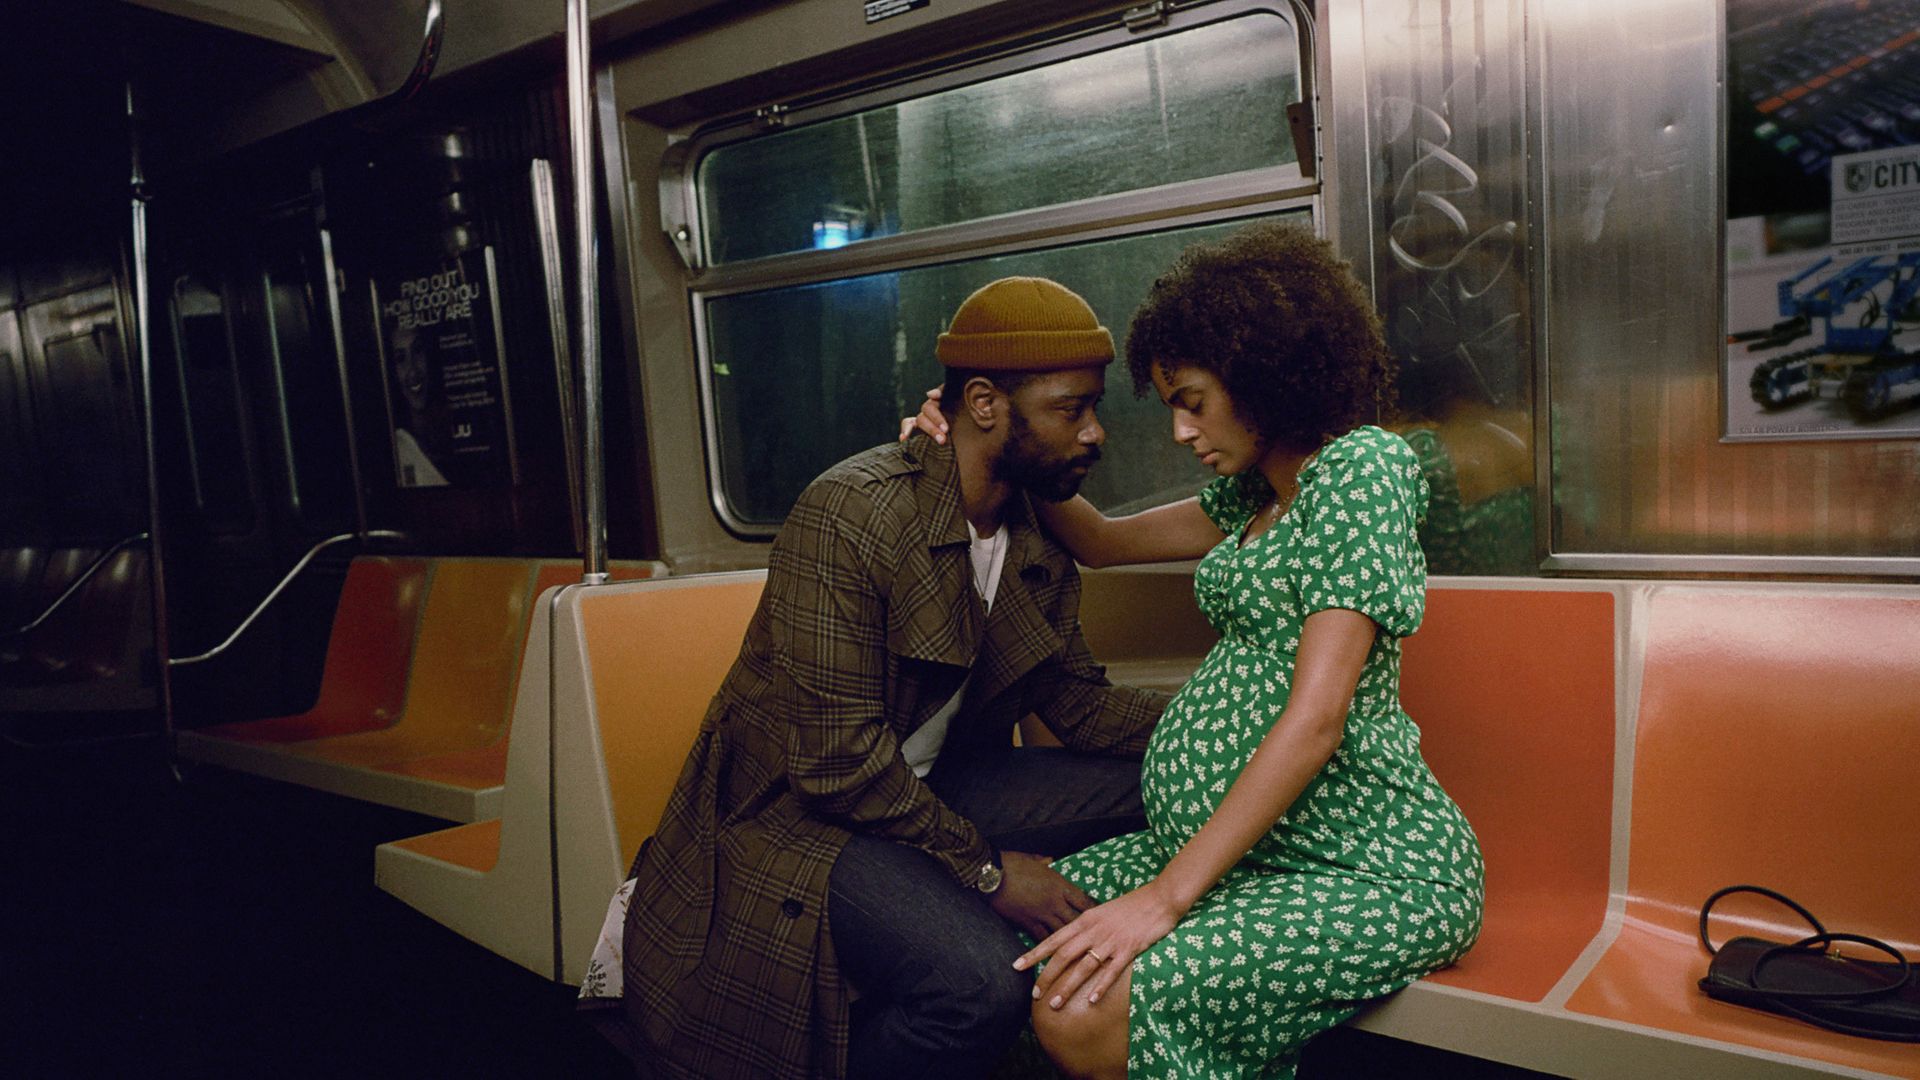 A photo showing a scene from "The Changeling." A man wearing a beanie and a long coat is sitting with a woman who is pregnant on an empty subway. His hand is on her leg and he's staring at her while she's looking down.